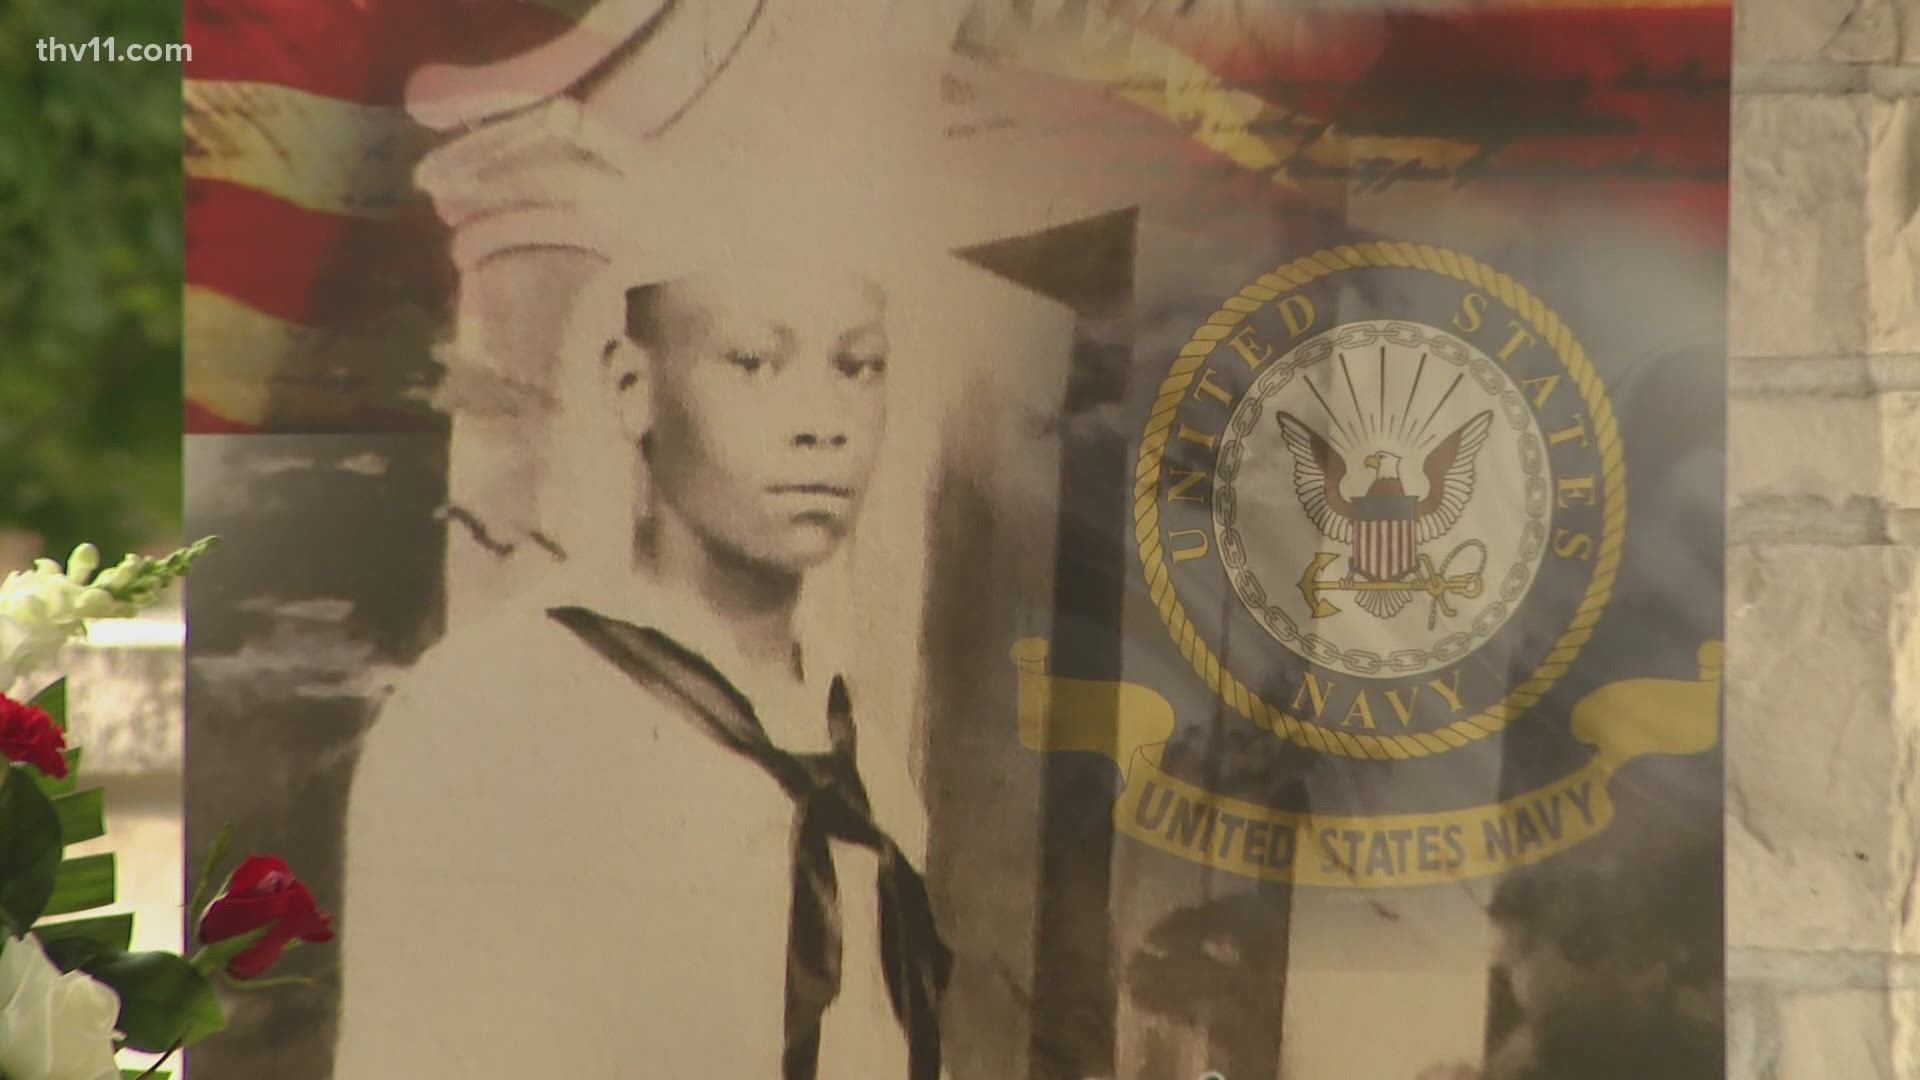 Eighty years after his death, a World War II hero from Woodson, Arkansas is finally getting the send off he deserves.